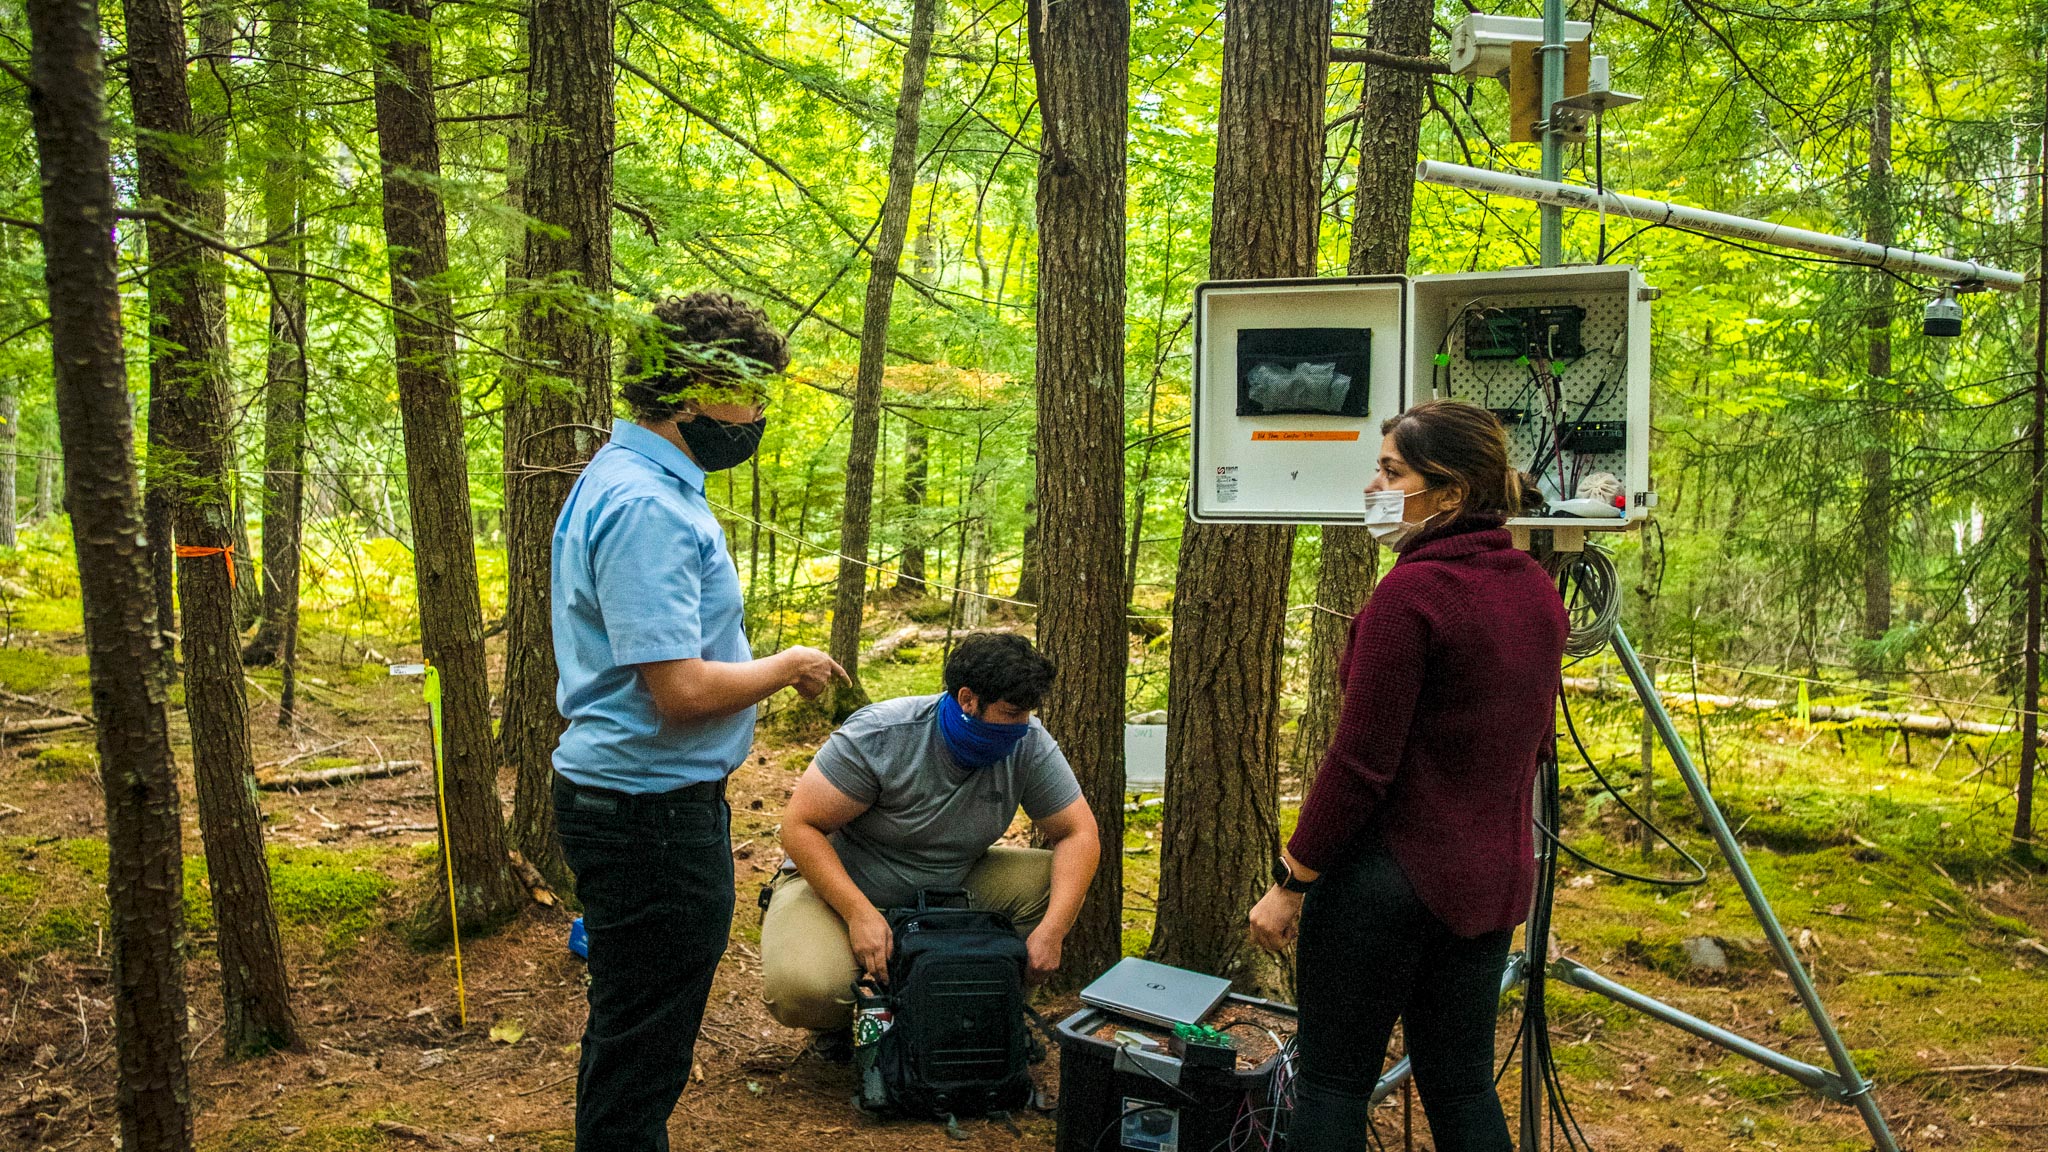 The people stand talking in the woods as they work on a sensor mounted on a tripod